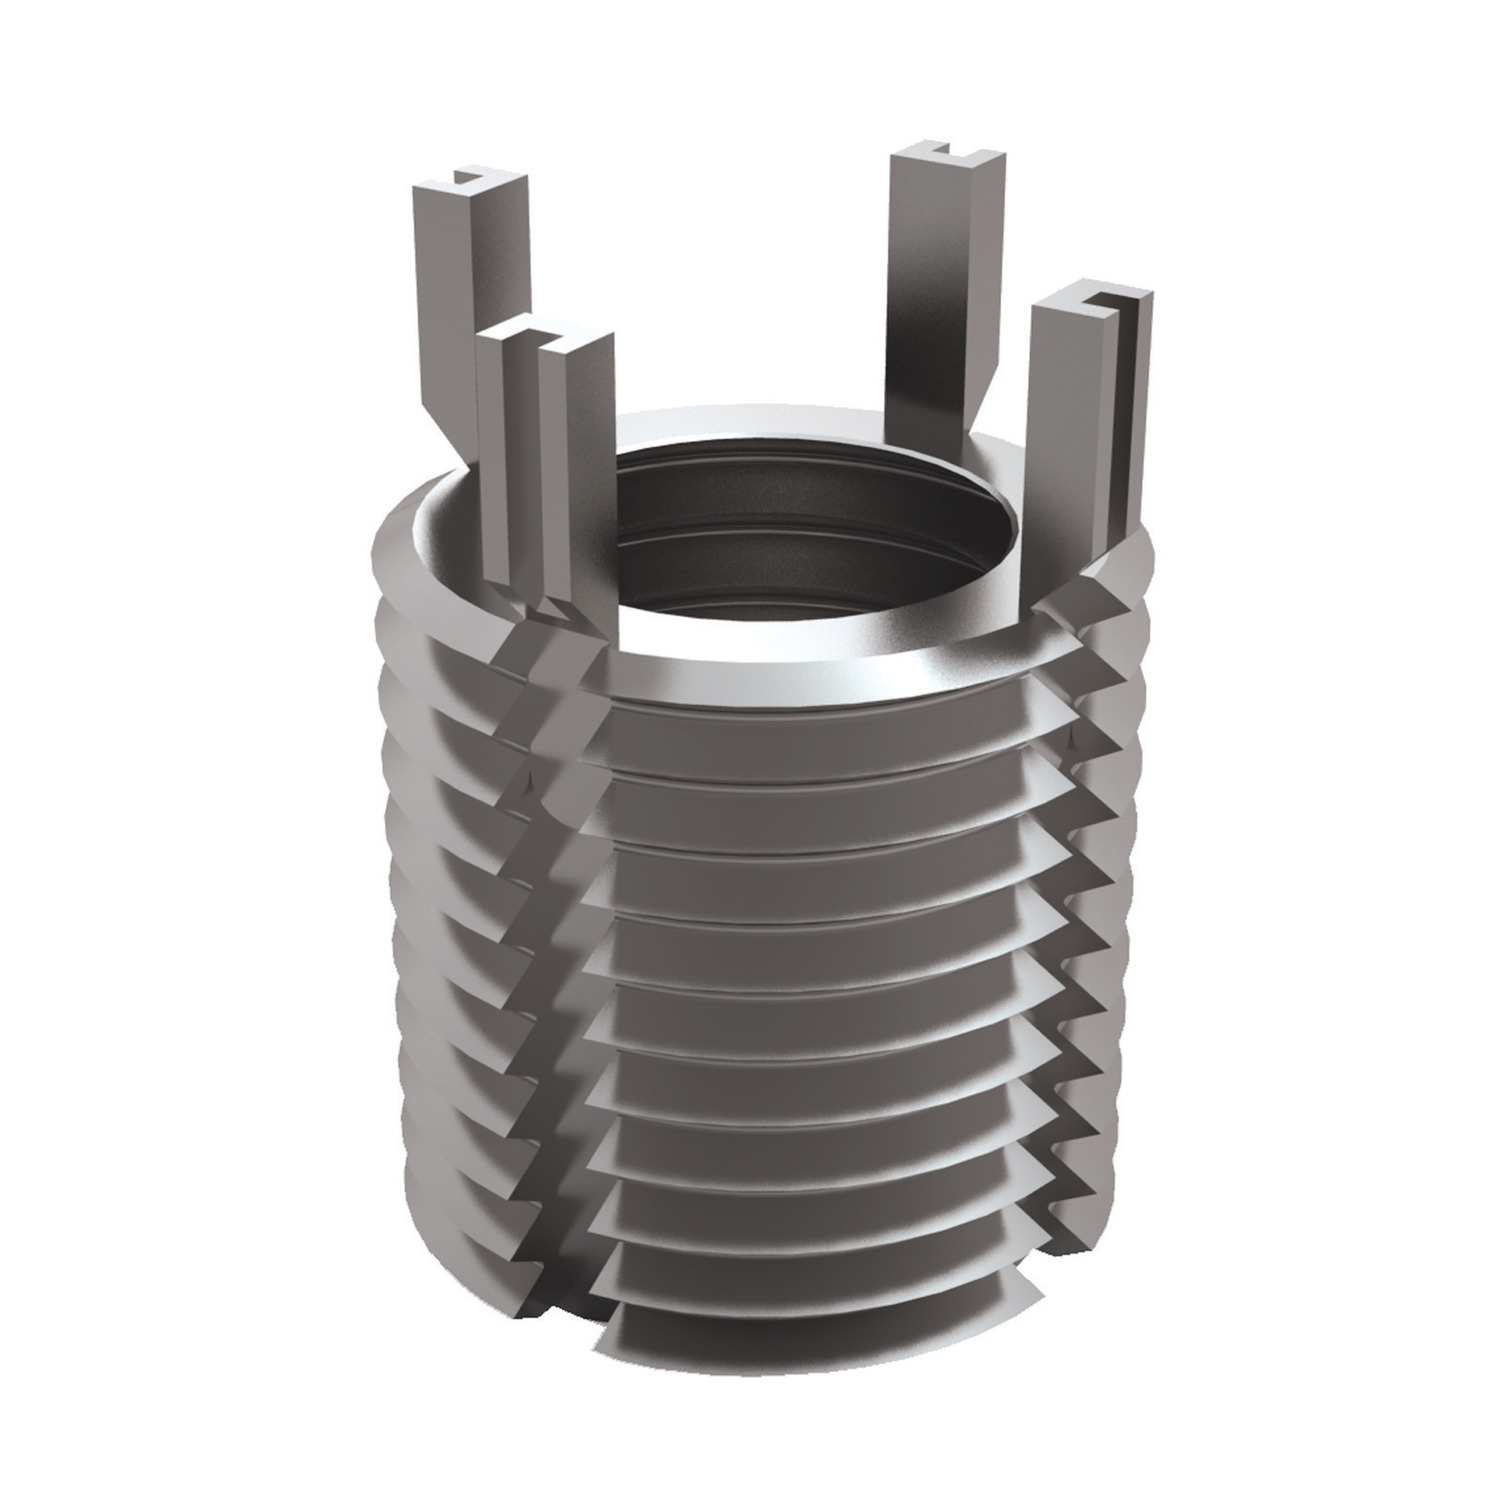 Product 22012, Threaded Insert - Metric - Inch heavy duty - stainless steel / 